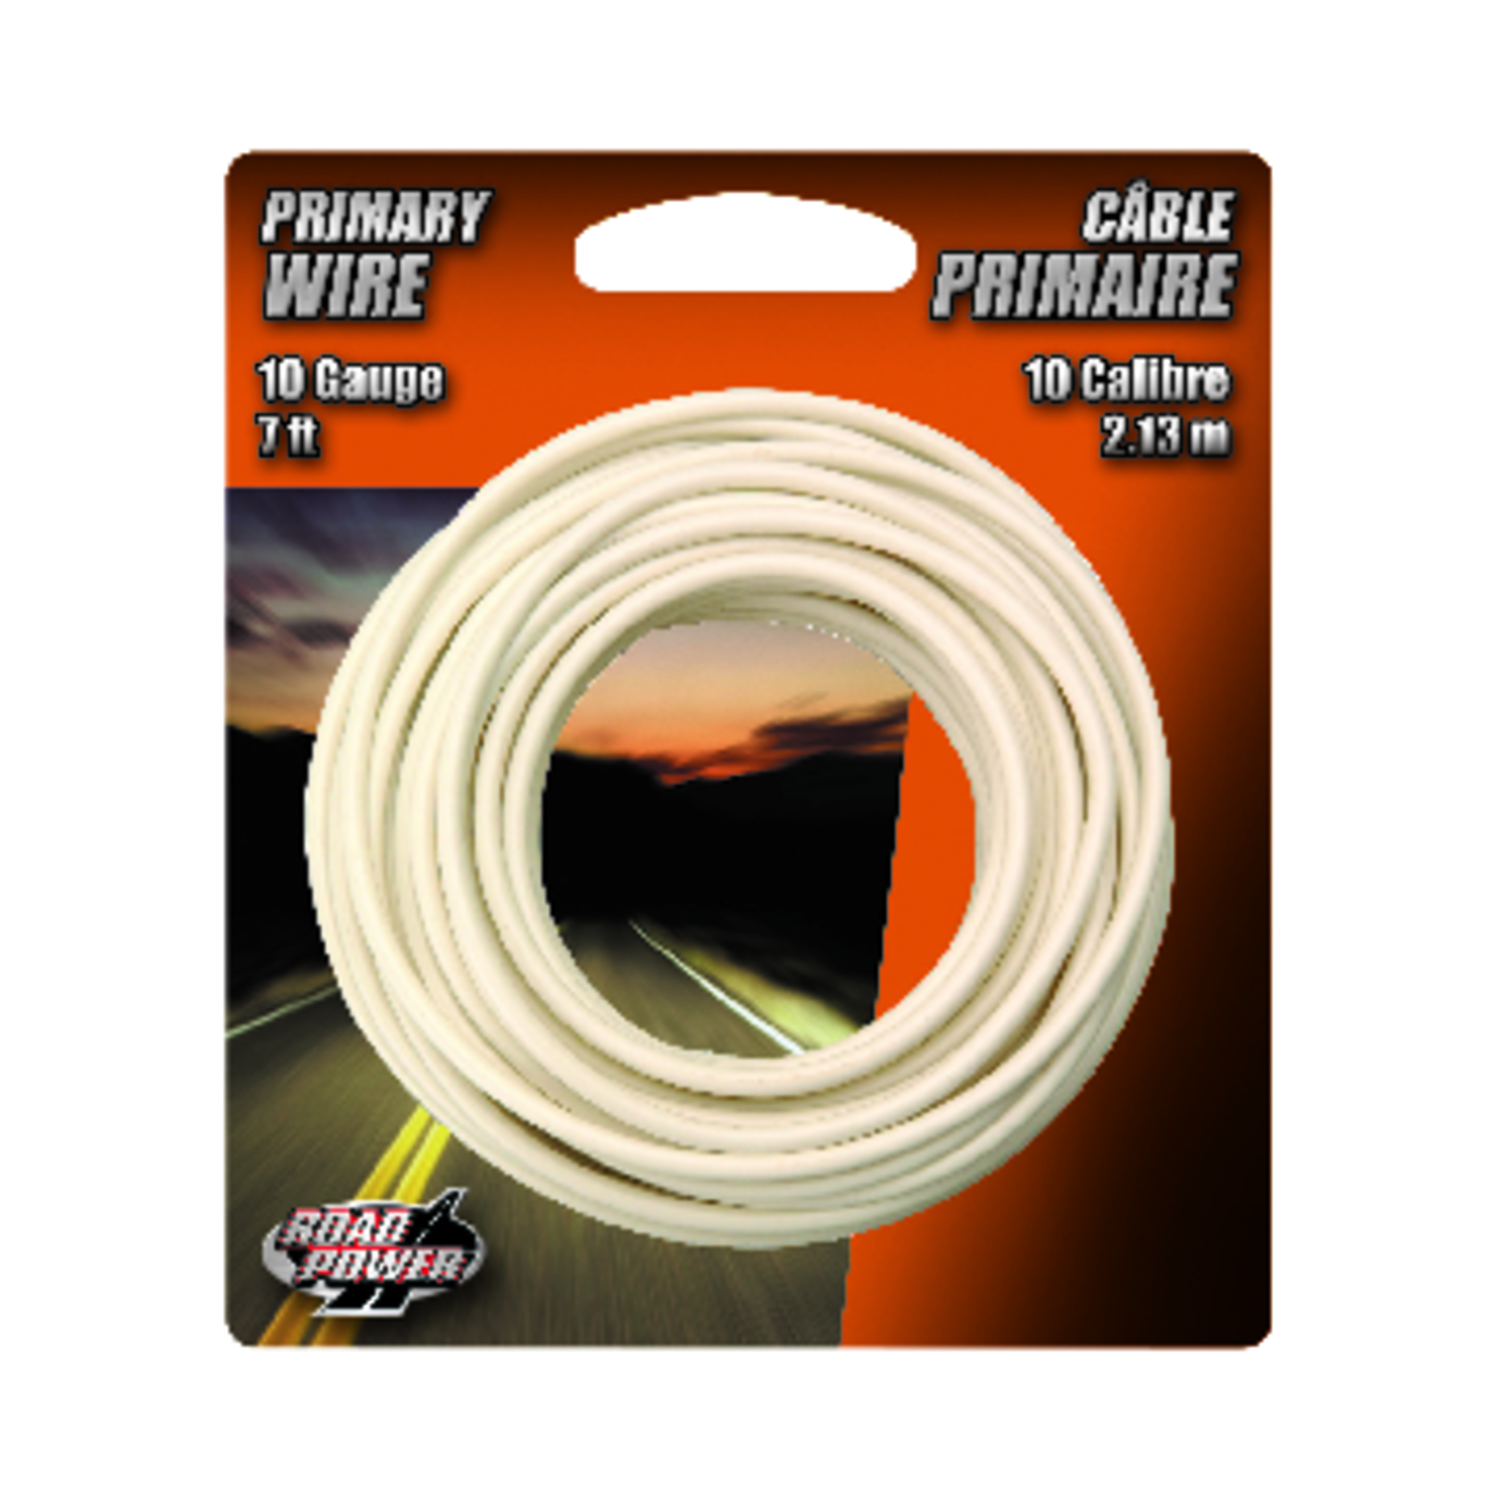 Coleman Cable 7 ft. Stranded 10 Ga. Primary Wire